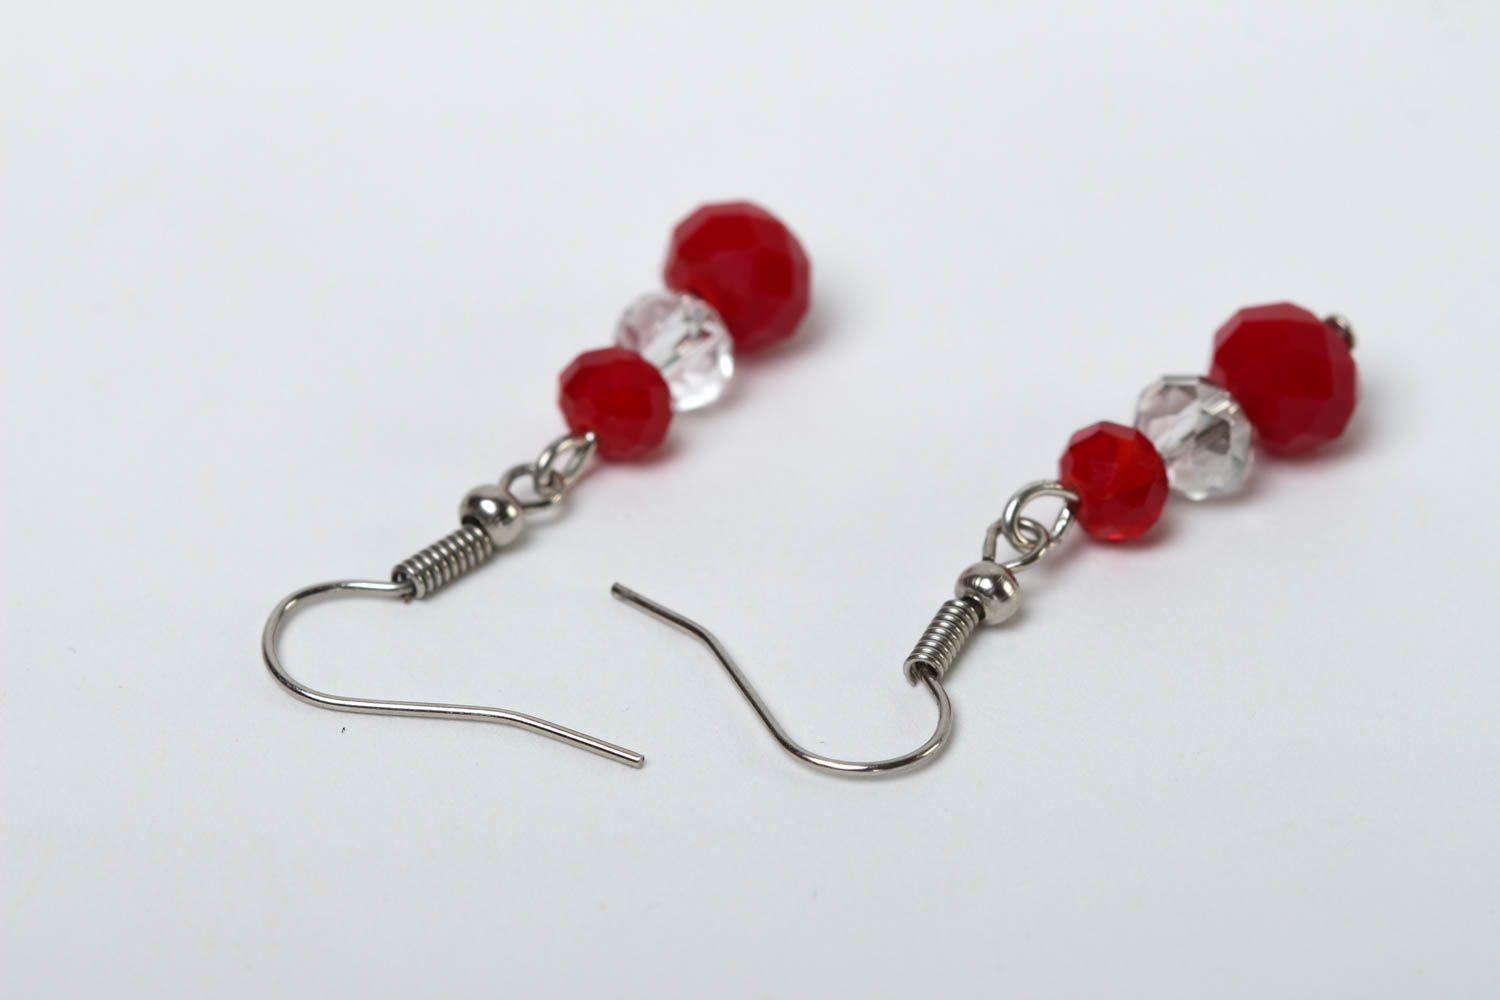 Handmade earrings with crystal beads earrings with charms designer jewelry photo 4